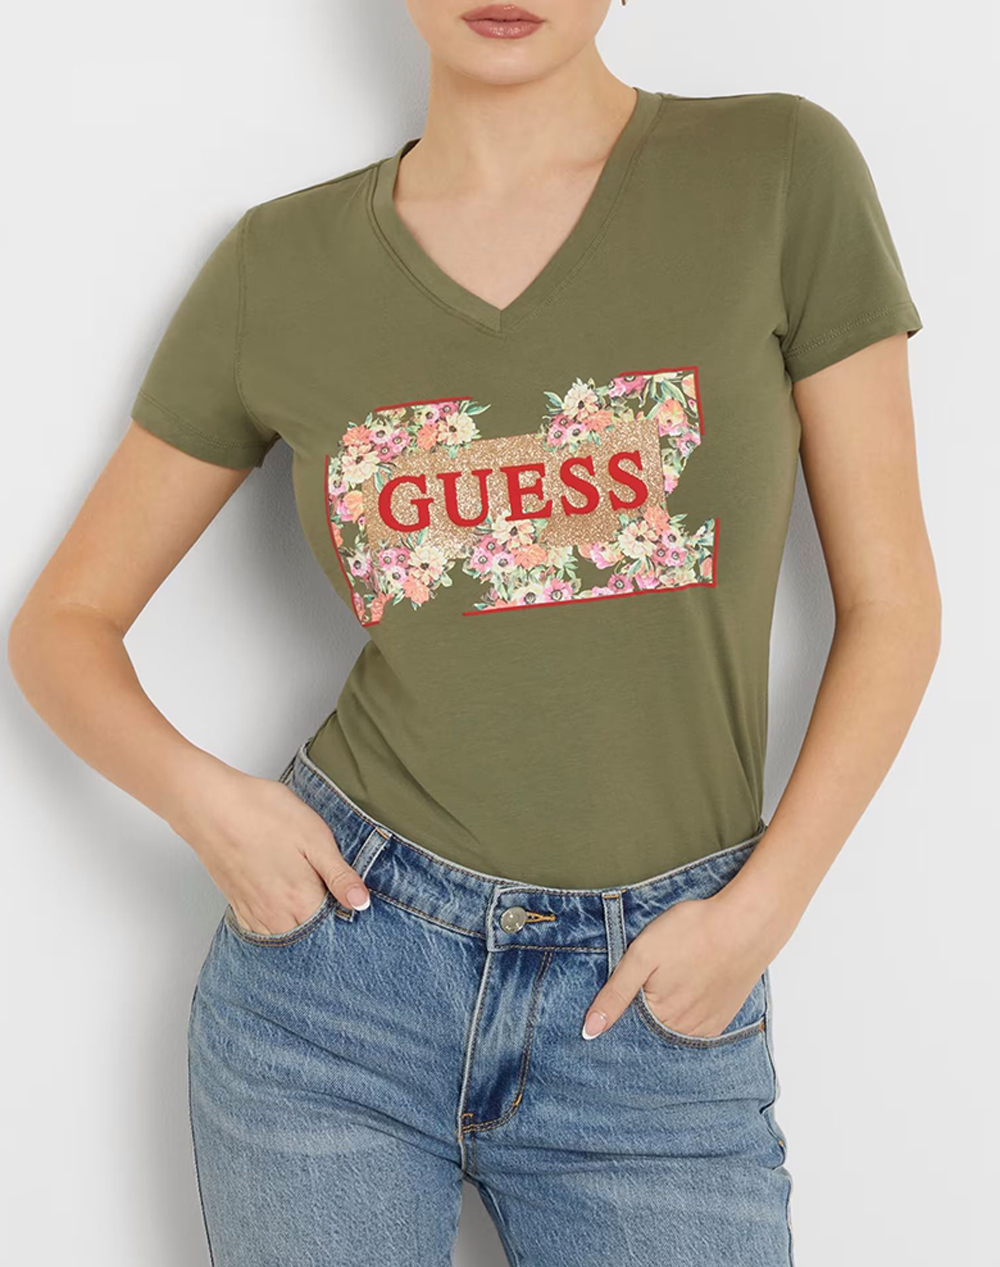 GUESS SS VN LOGO FLOWERS TEE ΜΠΛΟΥΖΑ ΓΥΝΑΙΚΕΙΟ W4GI23J1314-G831 Olive 3810AGUES3400397_XR16616